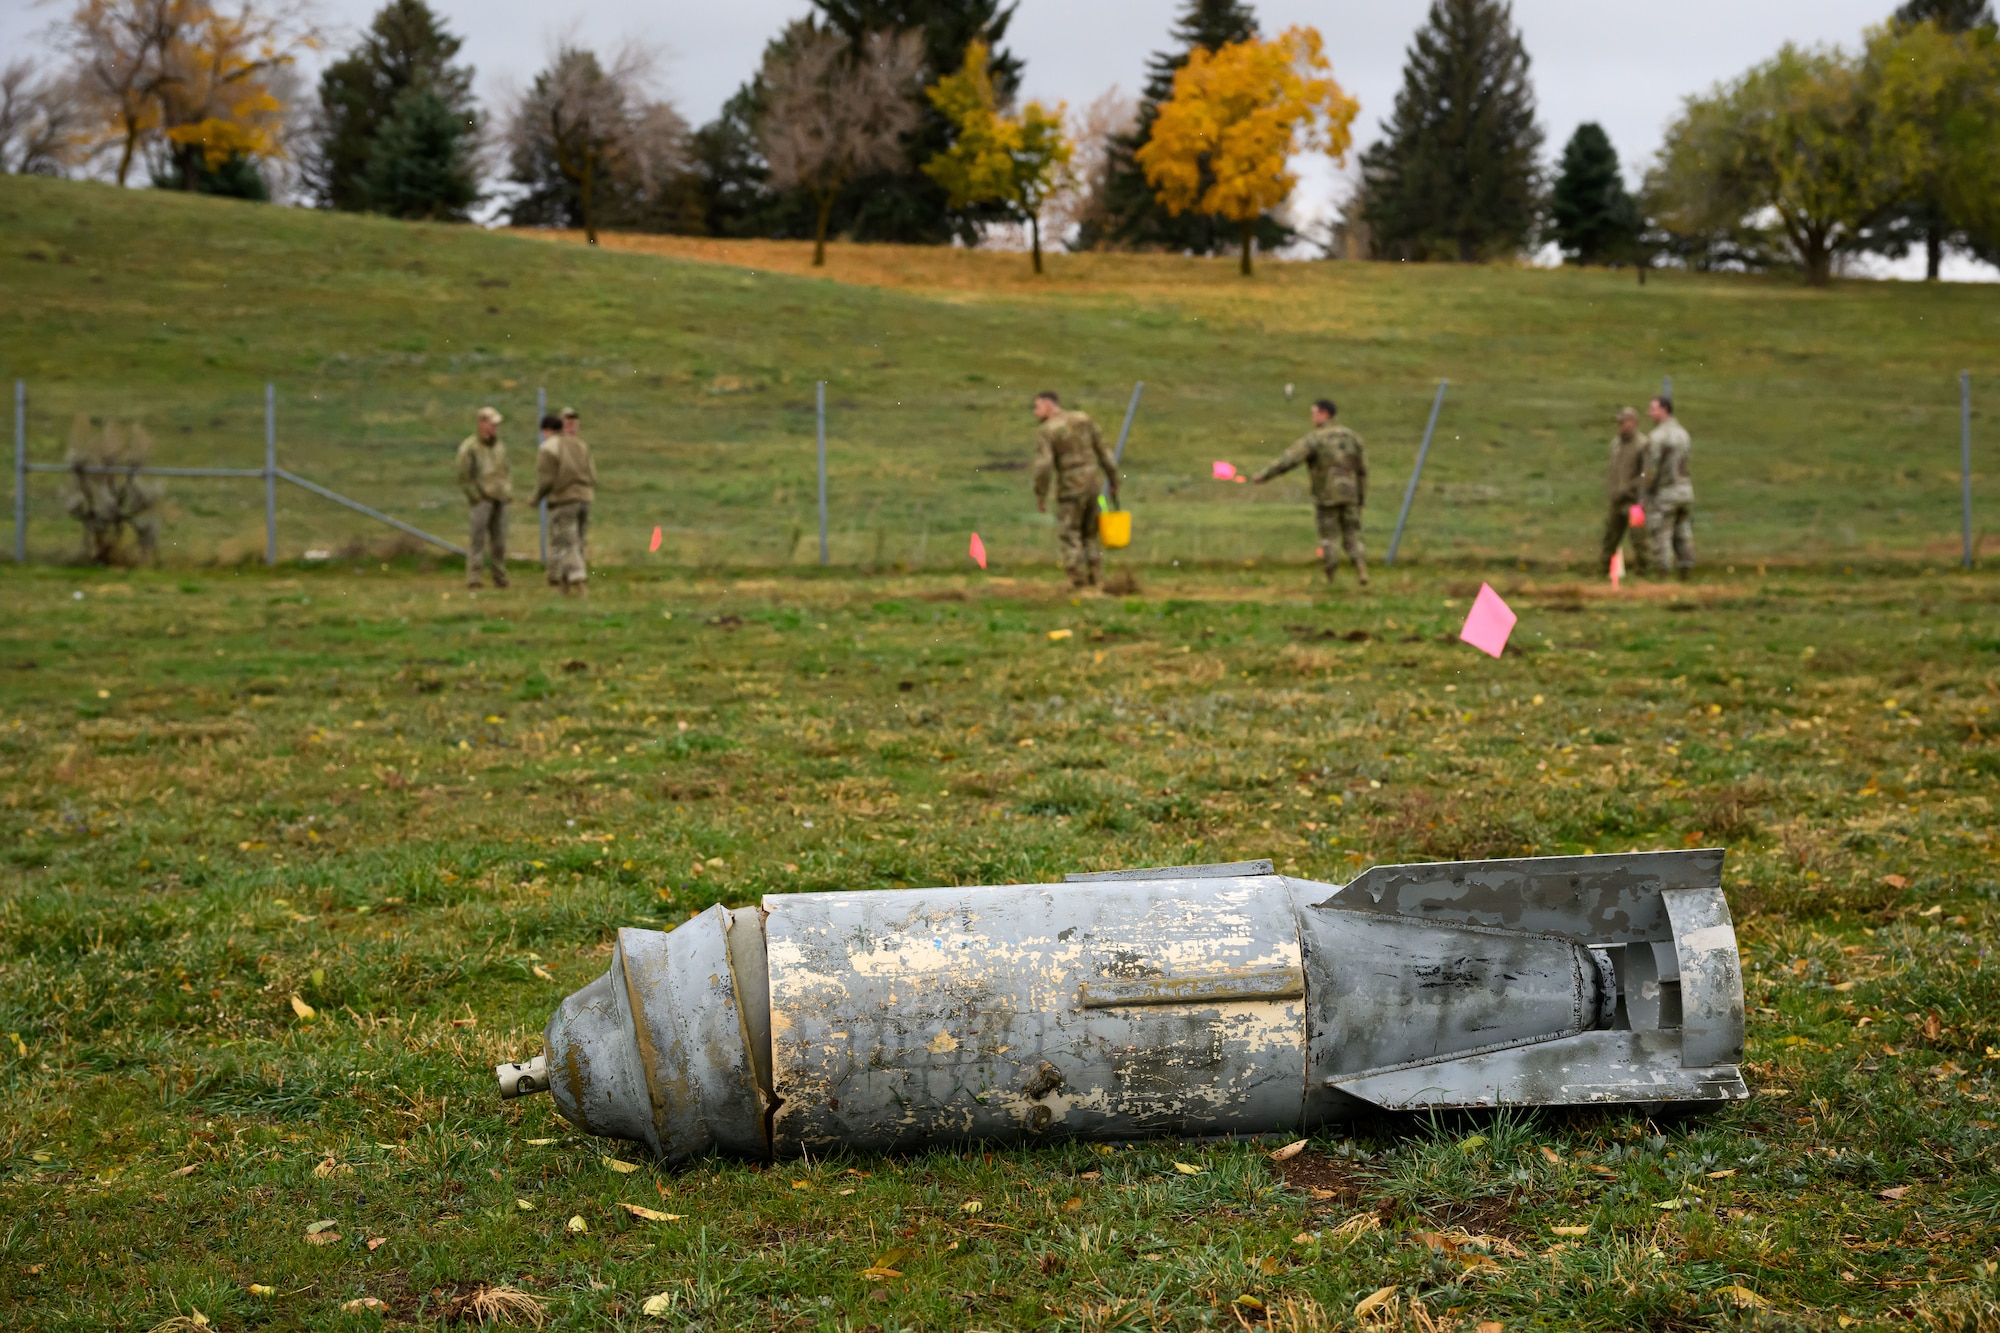 A dummy bomb lies in the foreground while Airmen walk in a field.